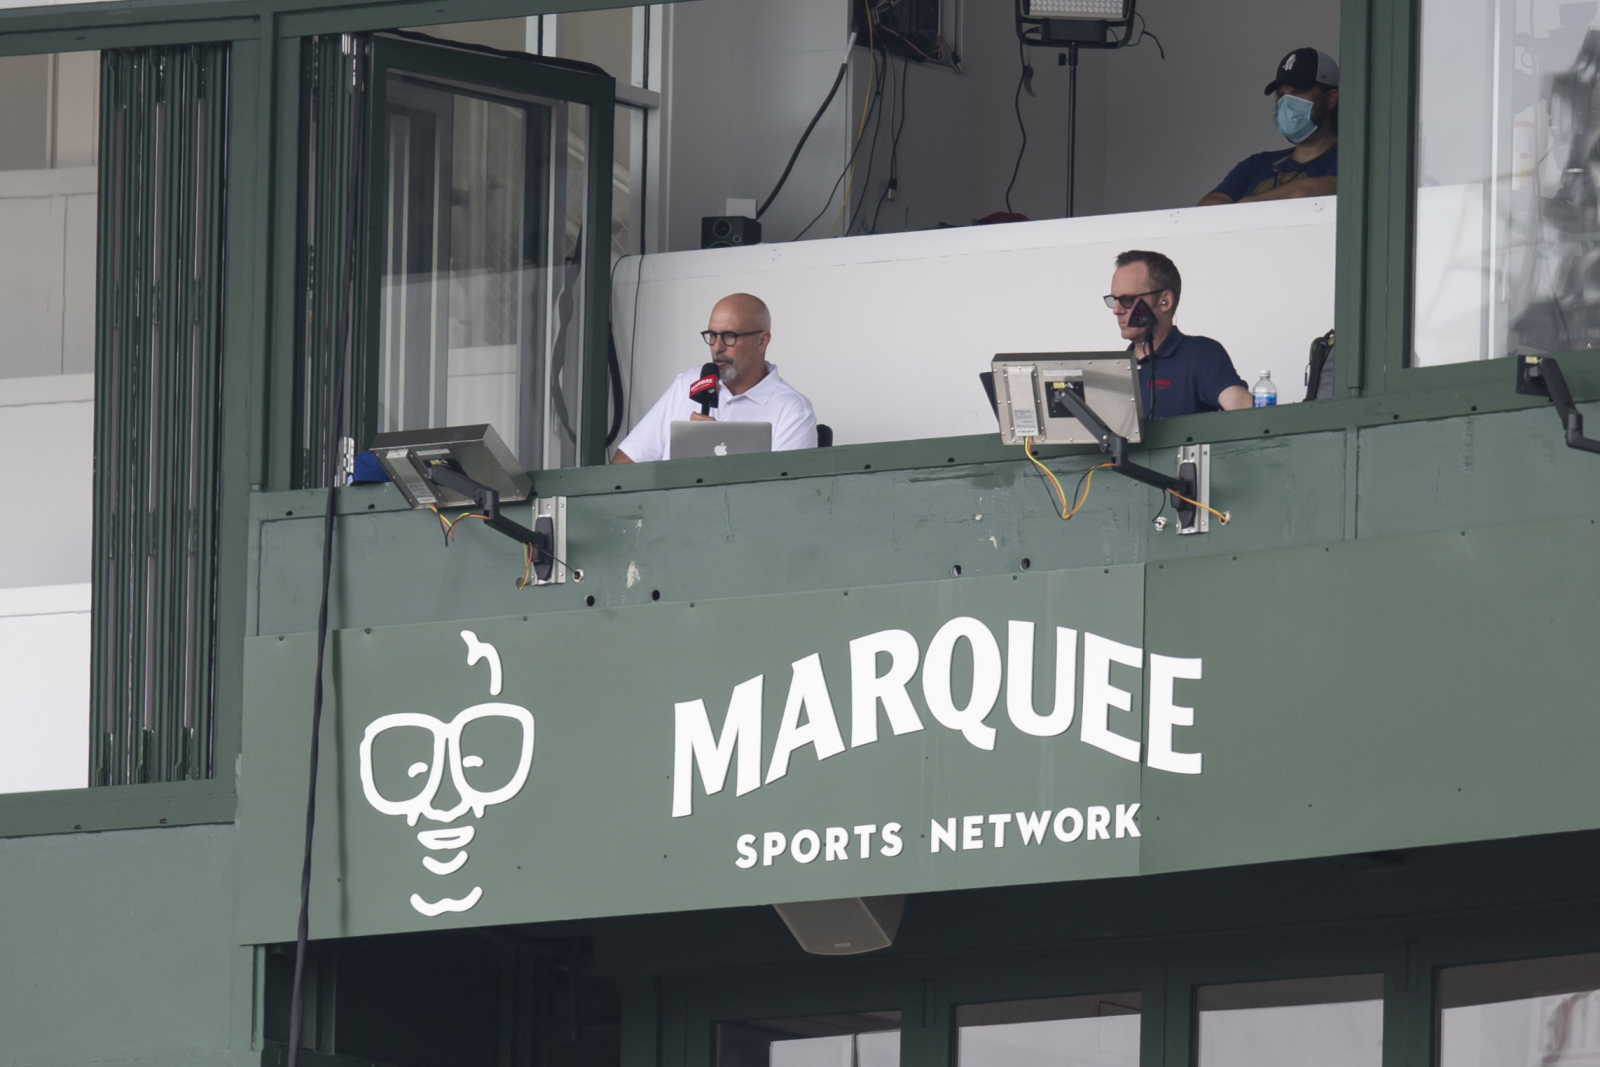 Its time for the Chicago Cubs to make Marquee Network nationwide